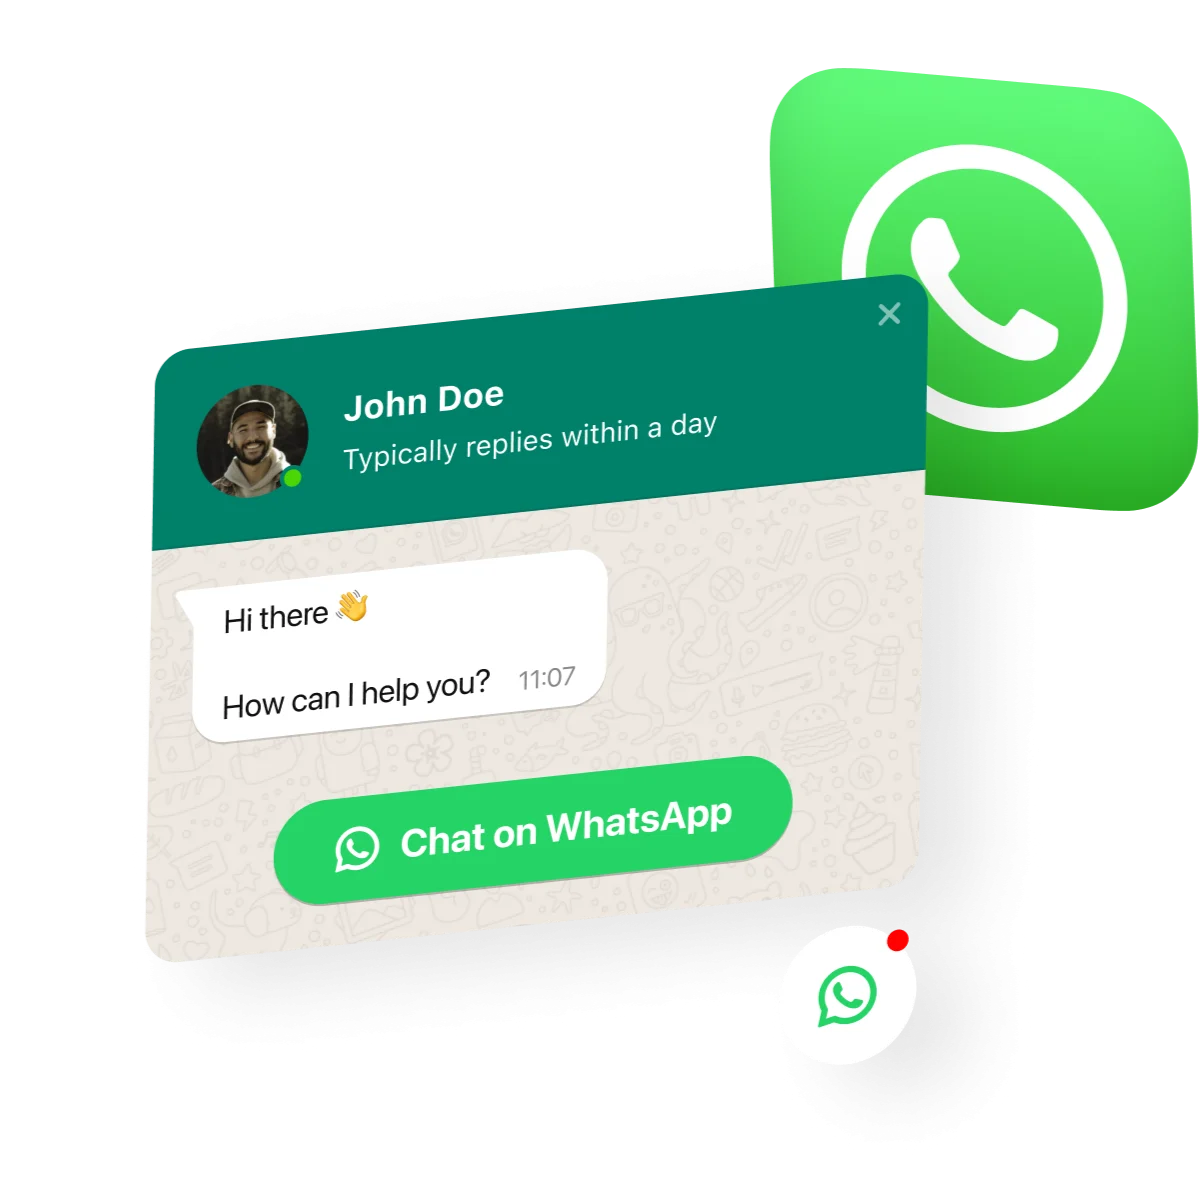 How to Embed WhatsApp Link in Website